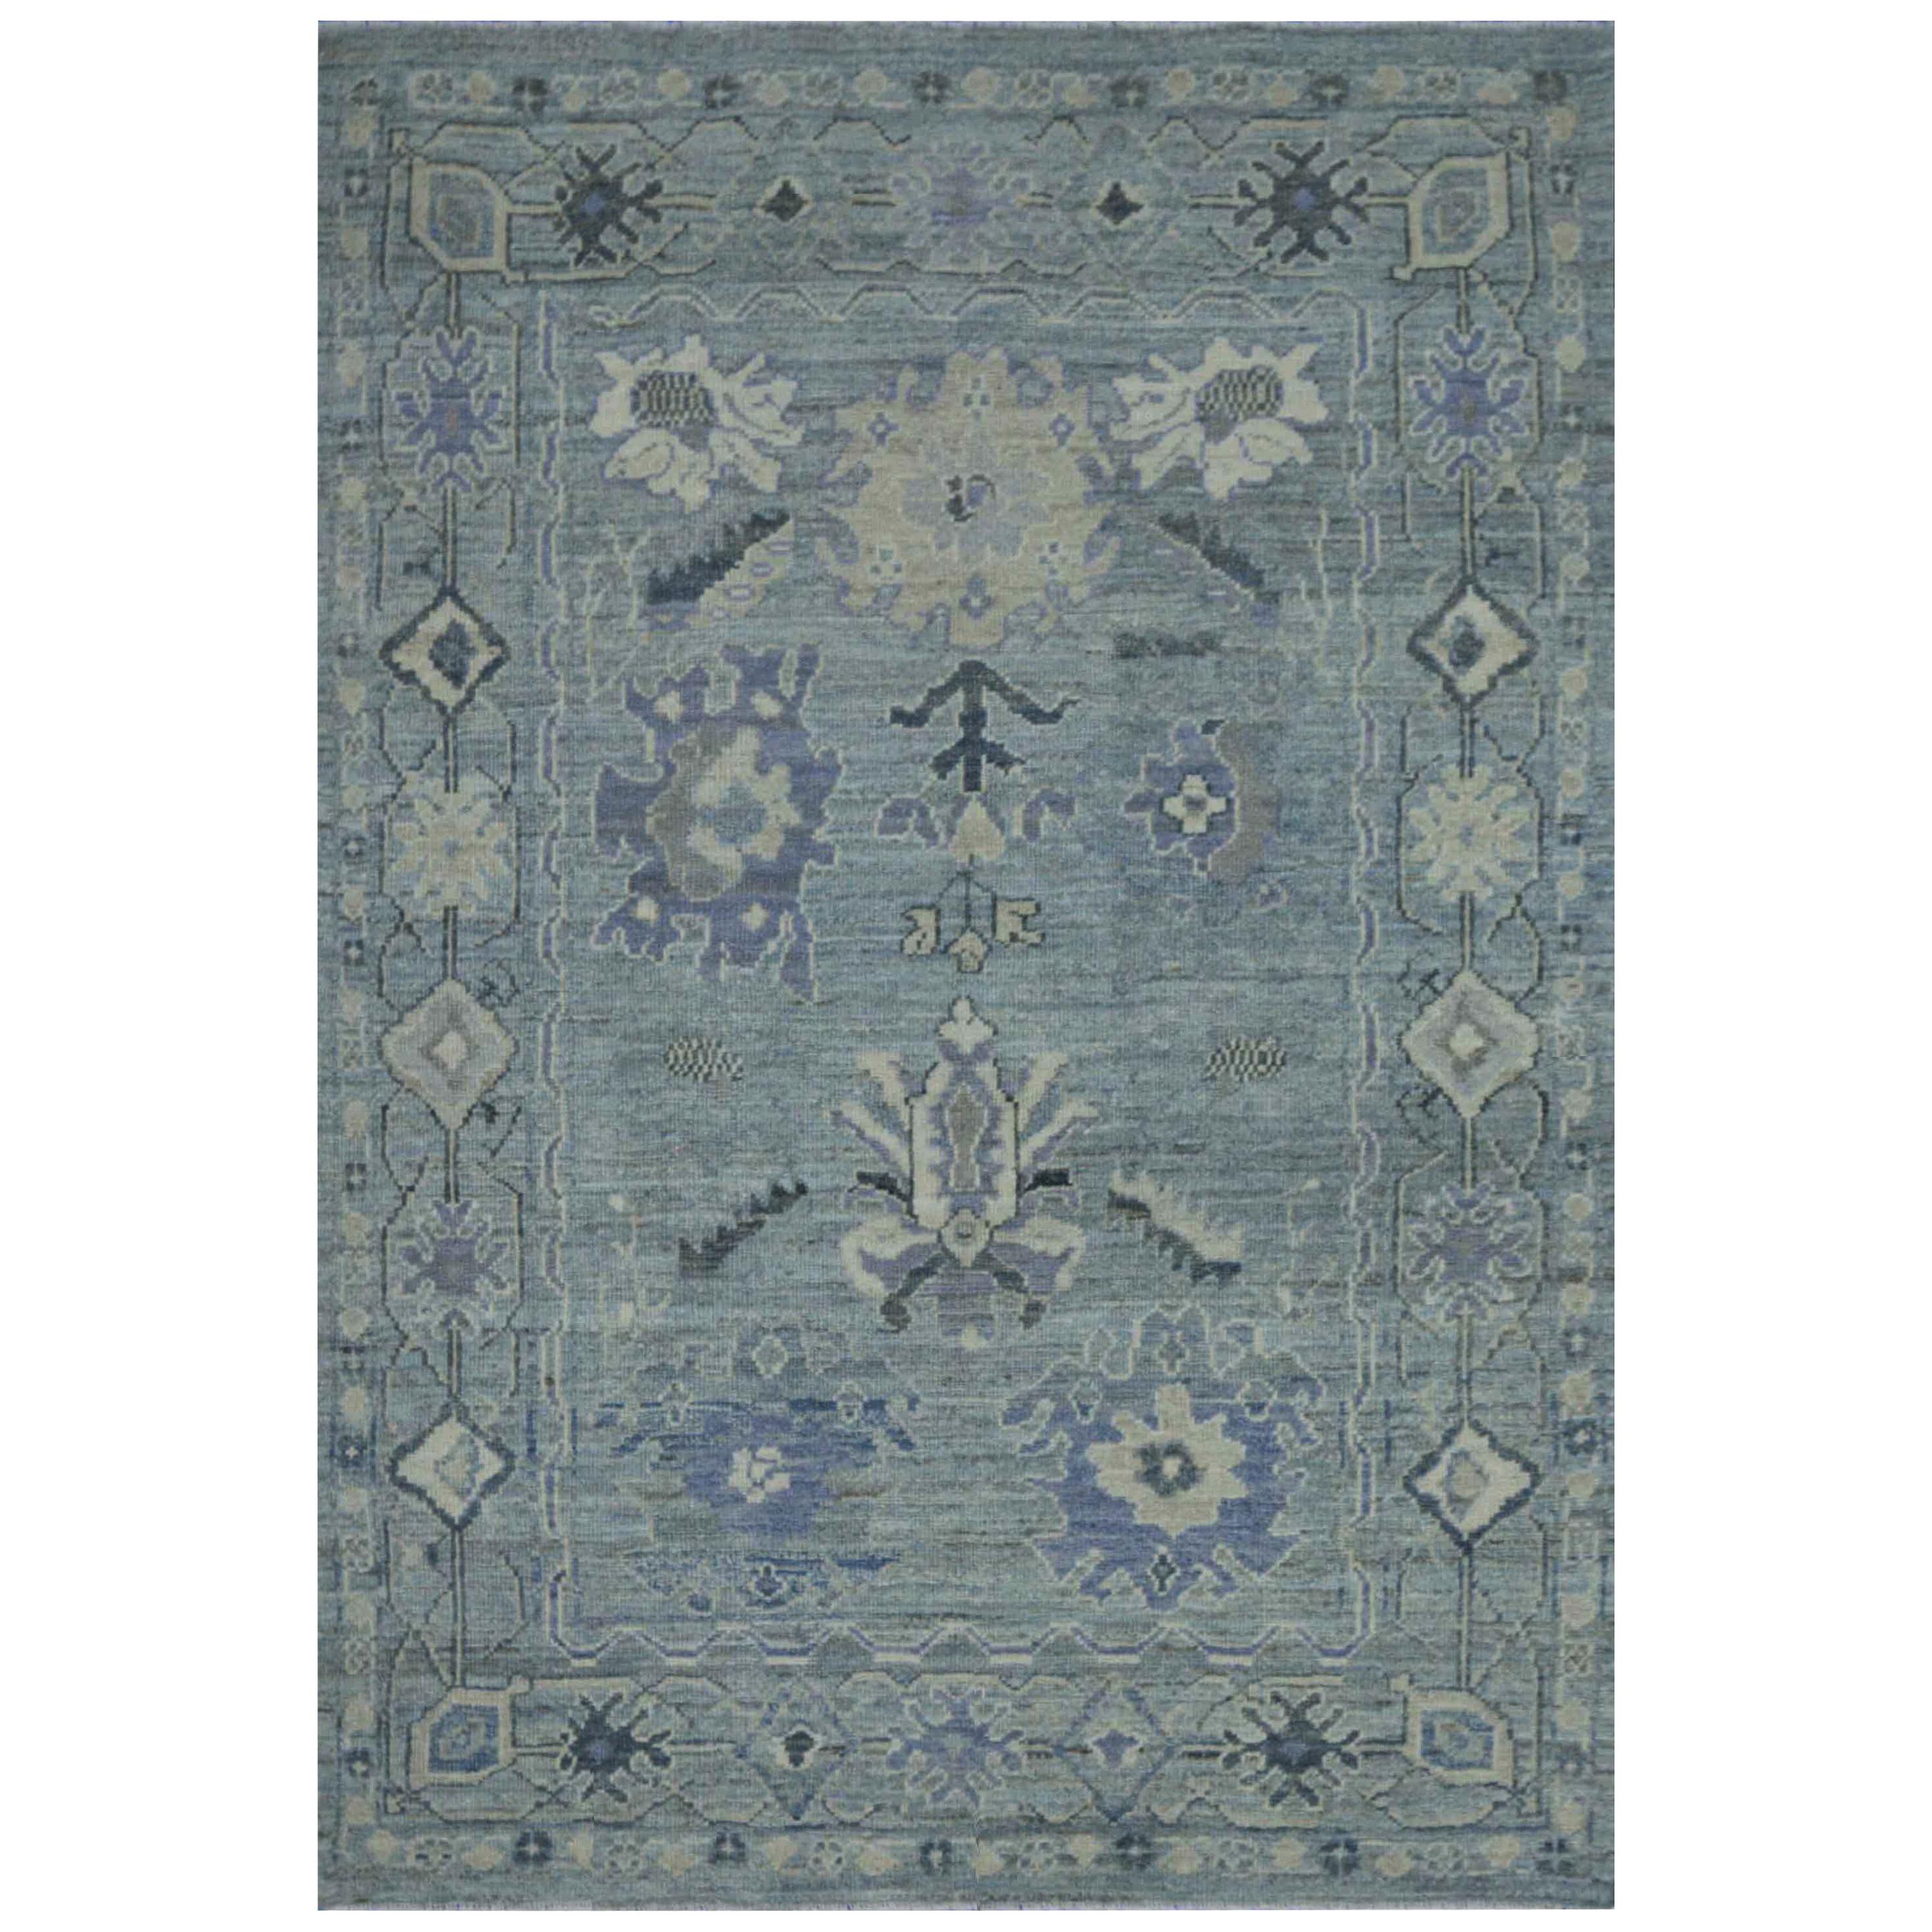 Modern Turkish Oushak Rug with Blue Field and Beige Floral Details